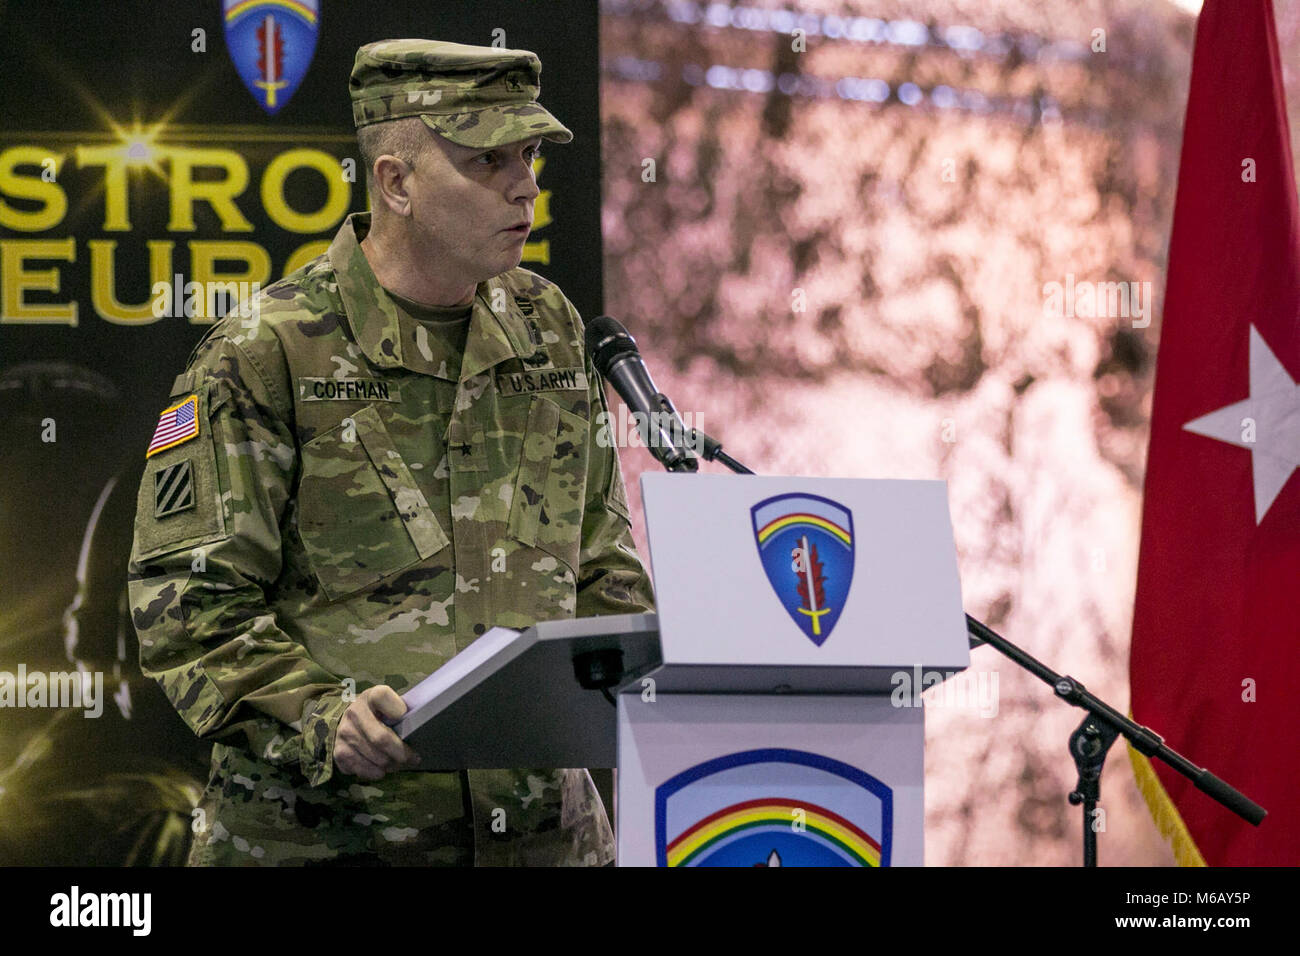 Brig. Gen. Richard R. Coffman, the incoming Mission Command Element commander, gives a speech to the Soldiers of 1st Infantry Division, Fort Riley, Kansas and 4th Infantry Division, Fort Carson, Colorado, during a transfer of authority ceremony held in Poznan, Poland, Feb. 28, 2018. (U.S. Army Stock Photo